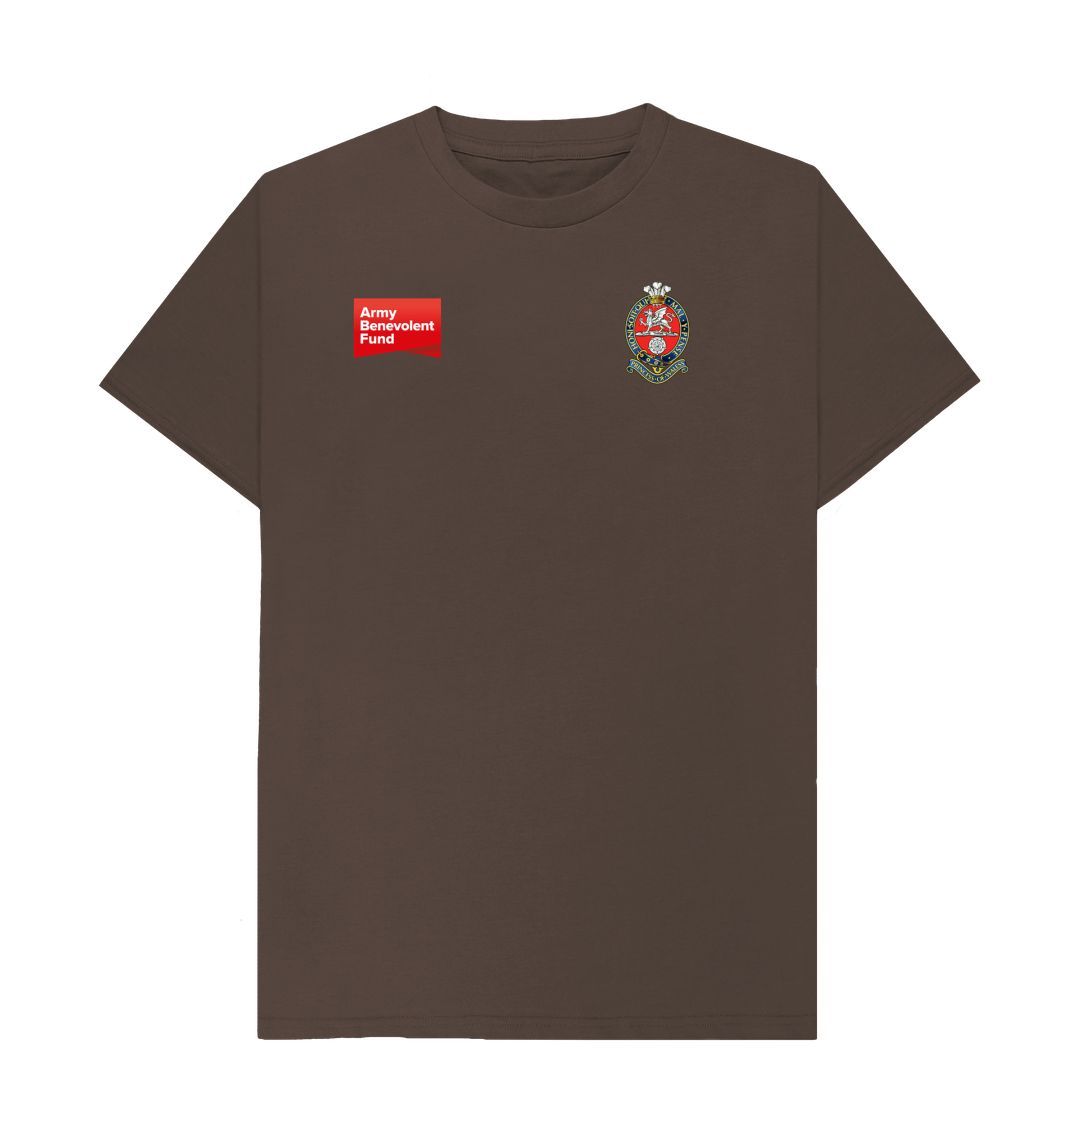 The Princess of Wales's Royal Regiment Unisex T-shirt - Army Benevolent Fund